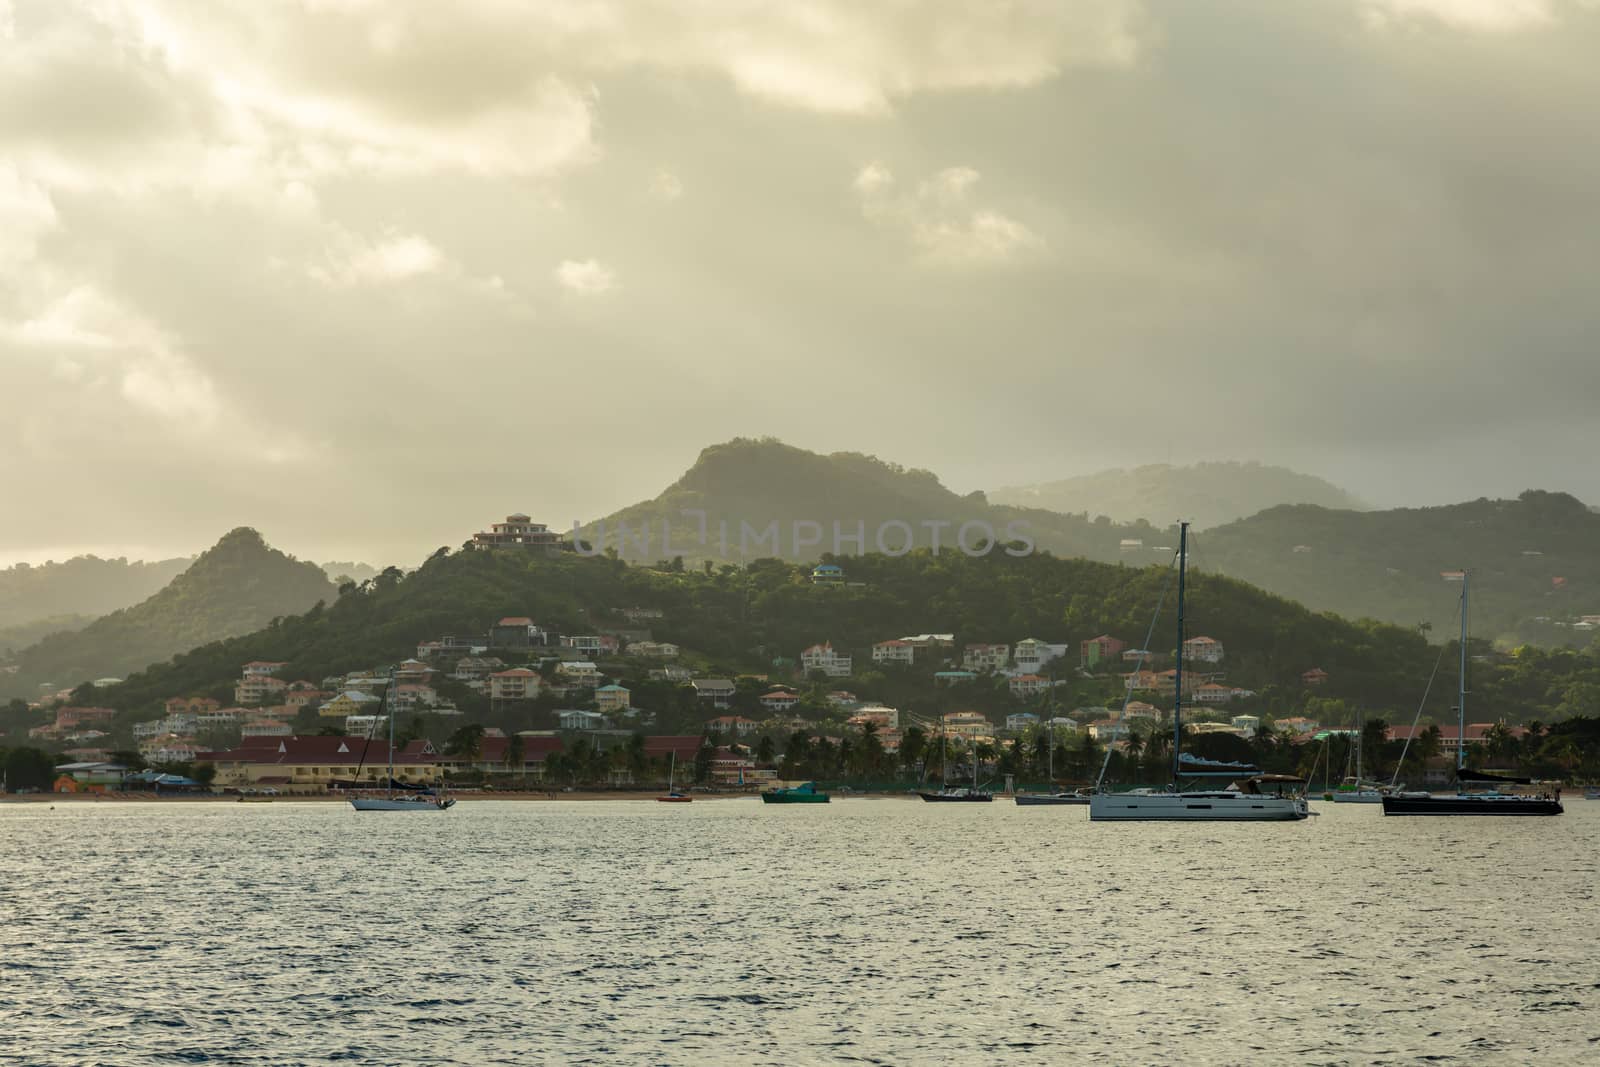 Sunrise view of Rodney bay with yachts anchored in the lagoon, Saint Lucia, Caribbean sea